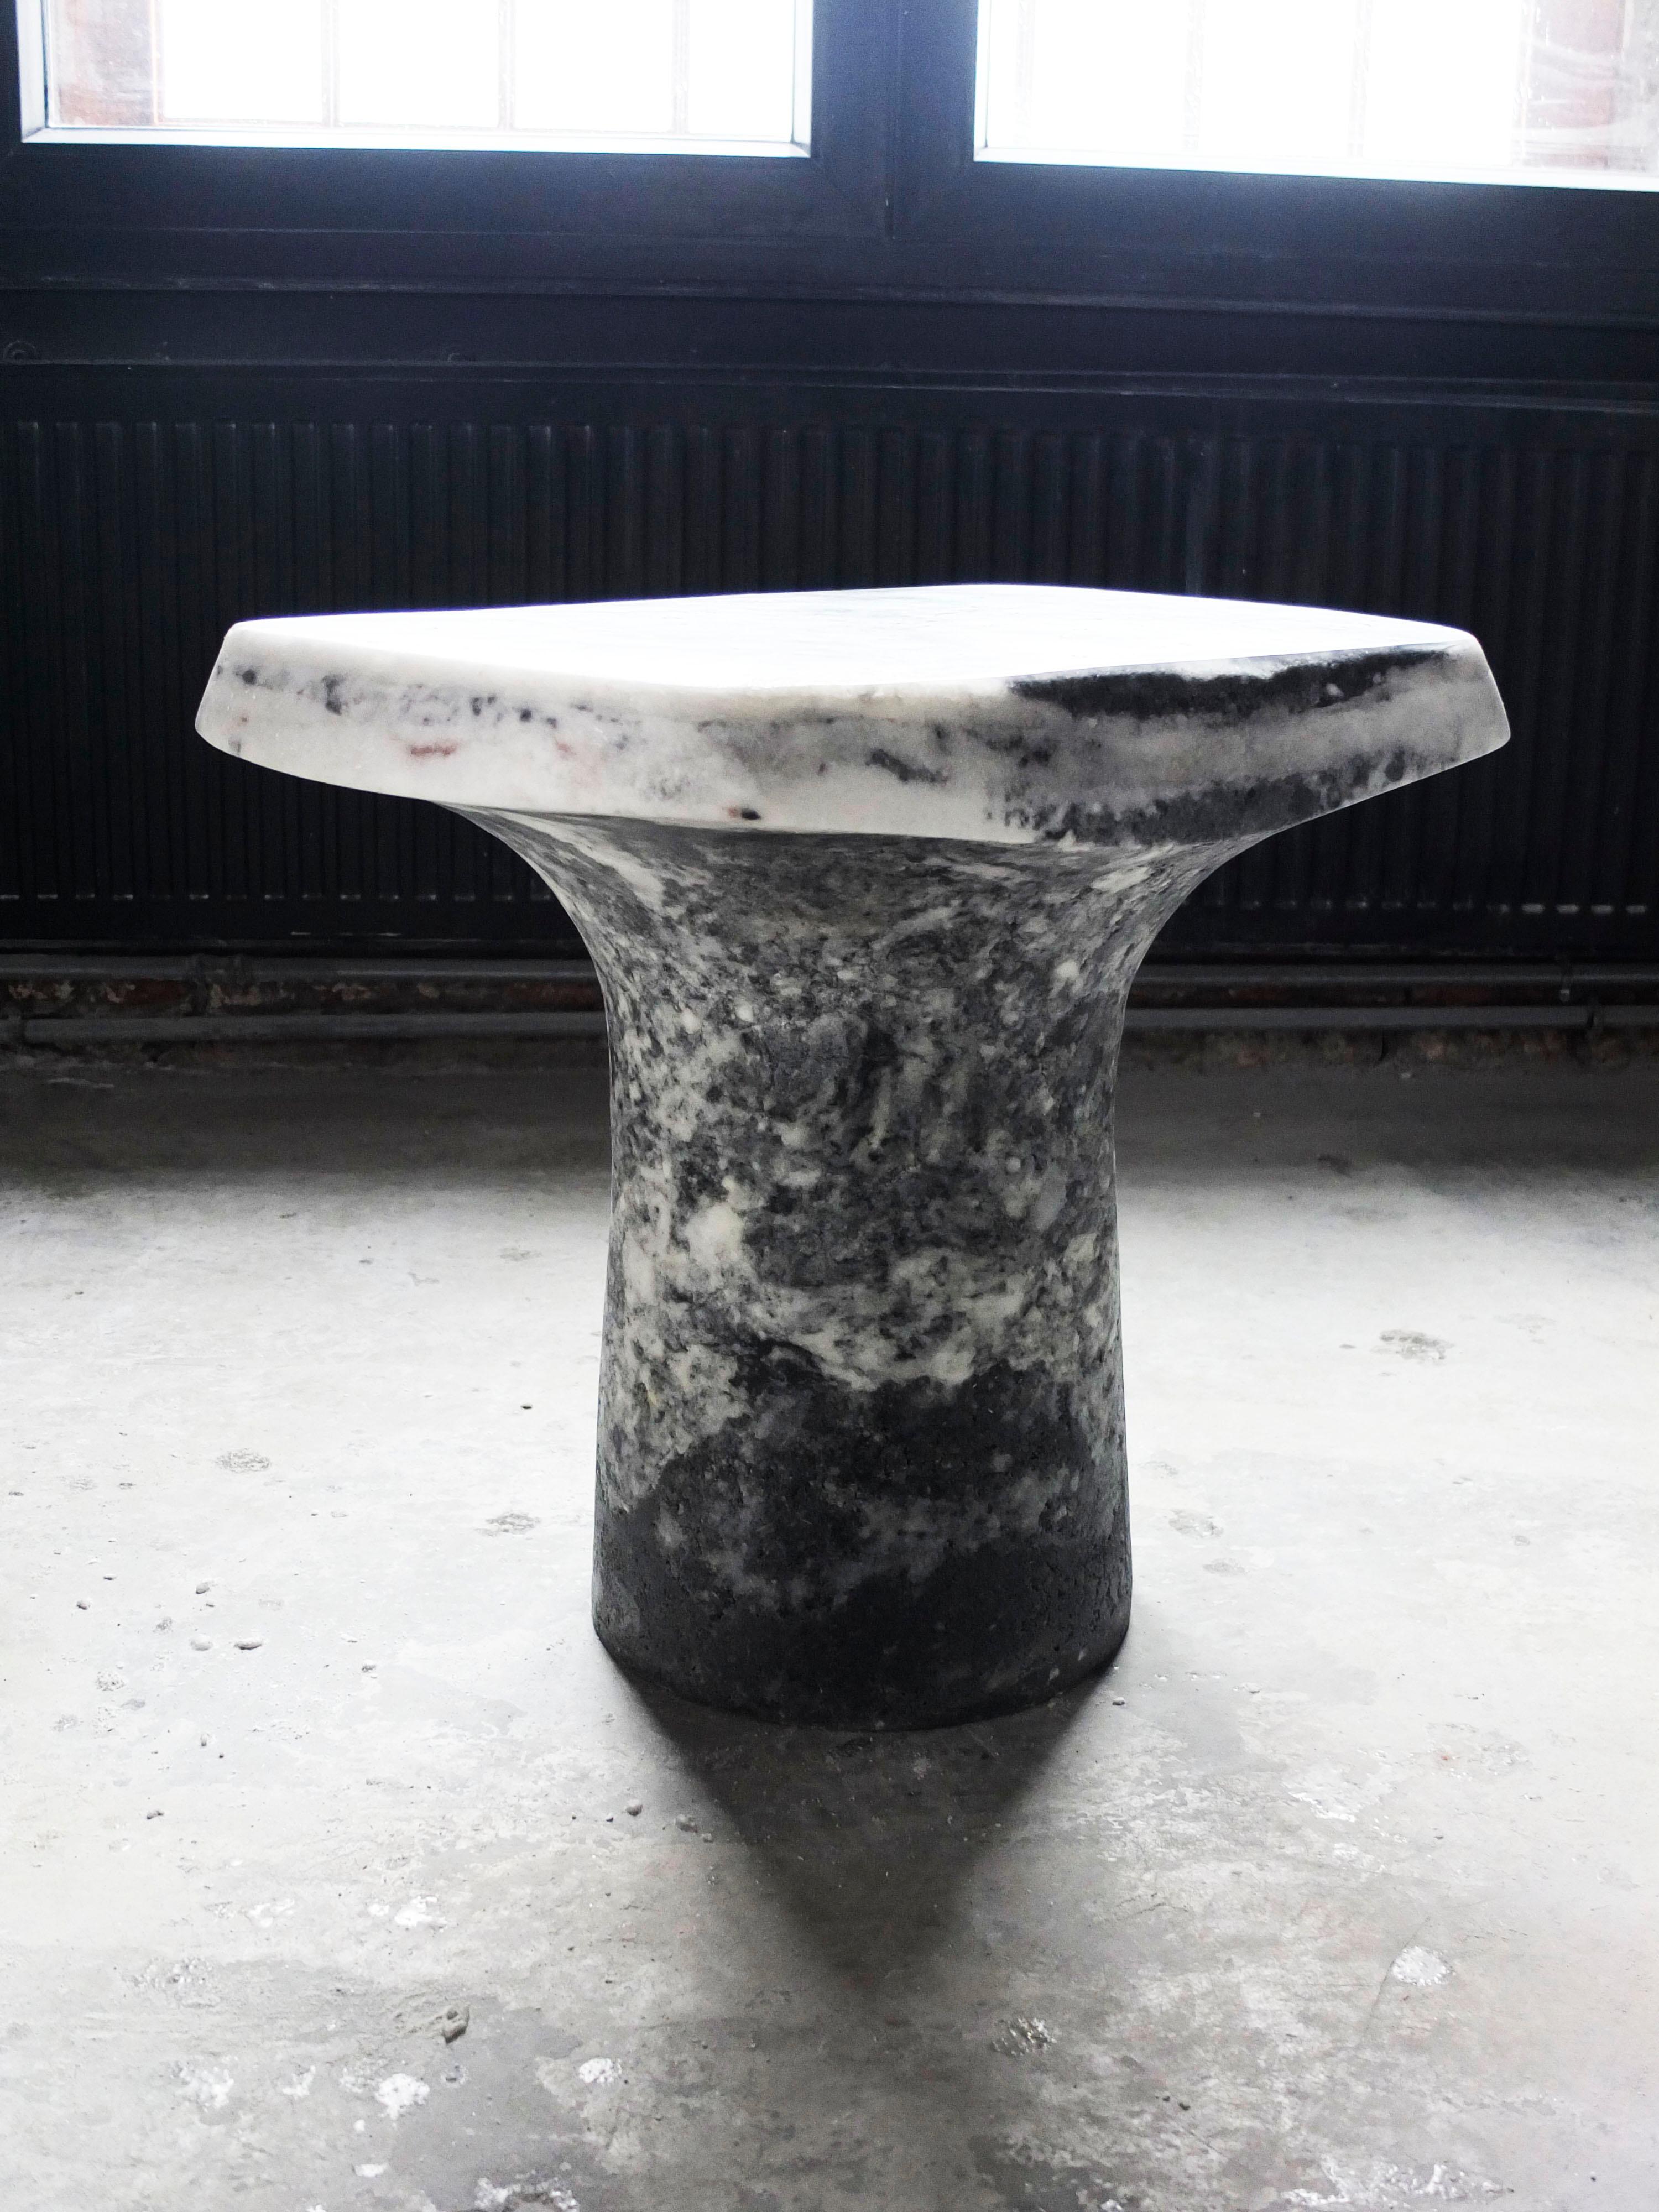 Grey T table by Roxane Lahidji
Dimensions: D 60 x W 40 x H 50 cm.
Materials: Marble Salt.
Weight: 50 kg.

Roxane Lahidji is a social designer specializing in ecological material developments and applications. Her research focuses on achieving